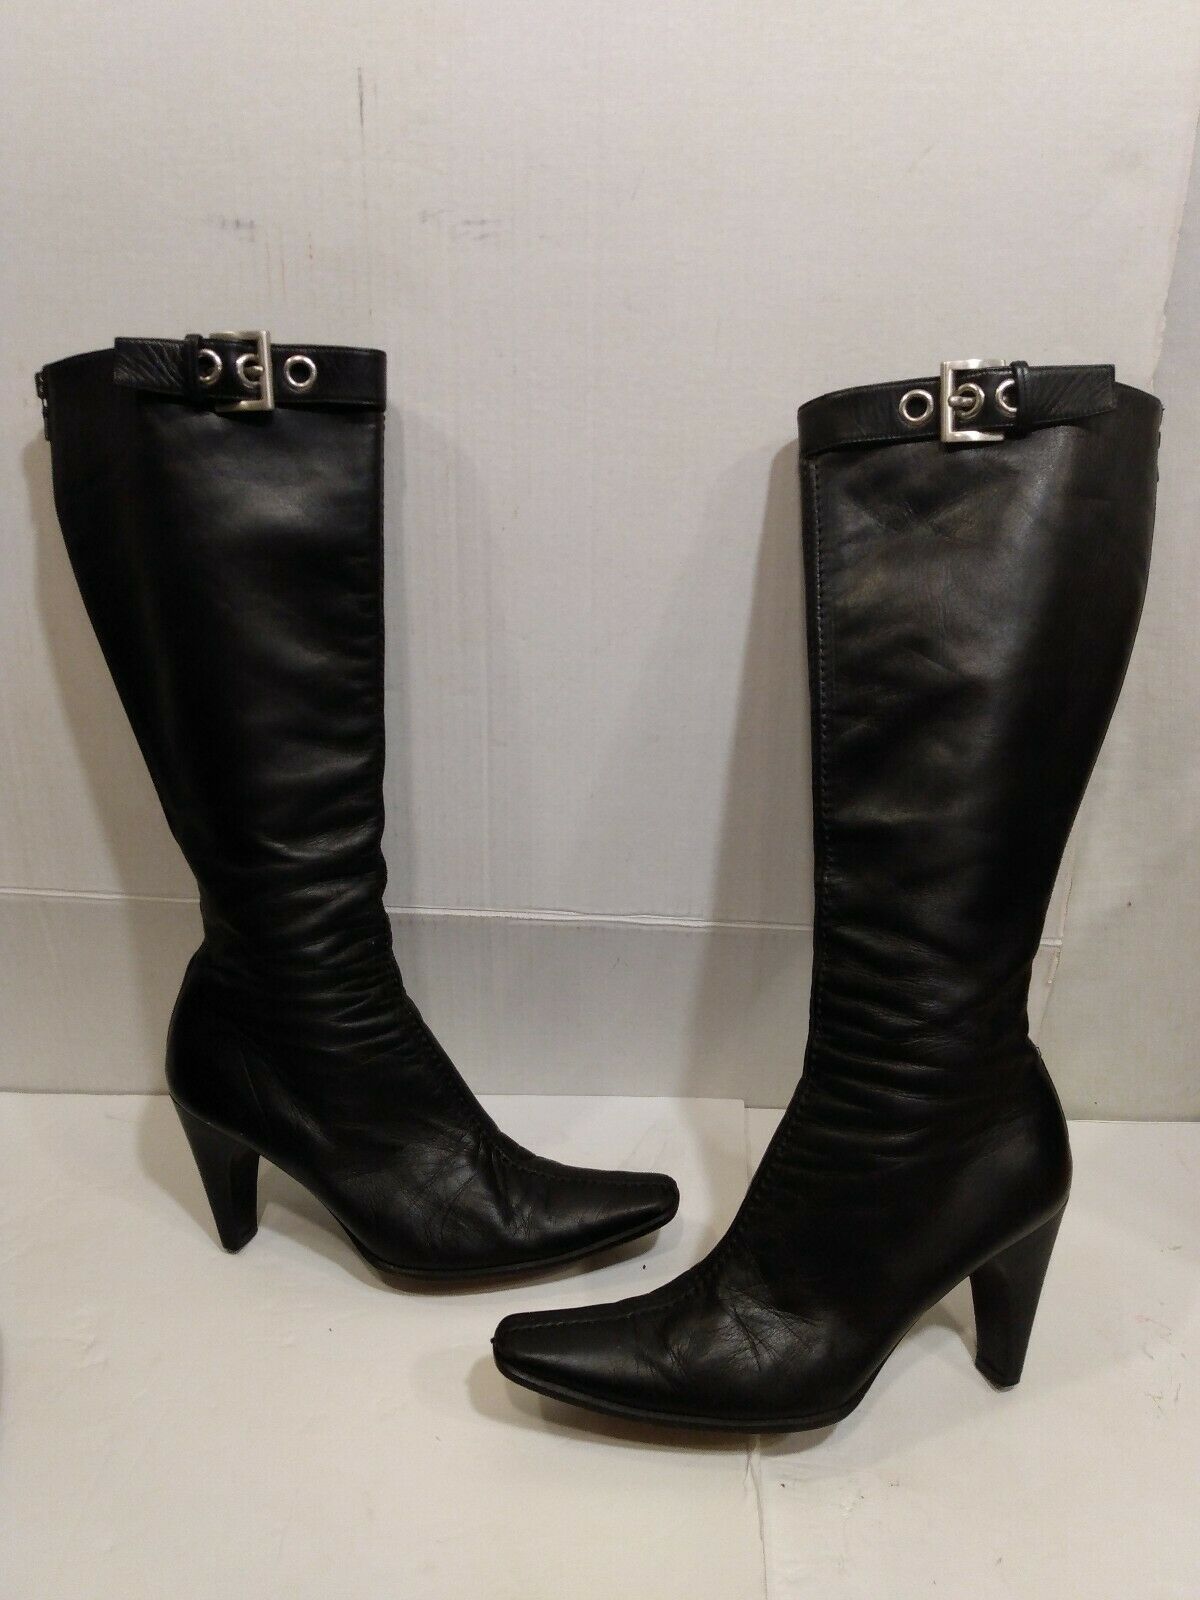 Primary image for PRADA Full Zip Leather Knee High Heel Boots Buckle Top Italy Size 36.5 EU